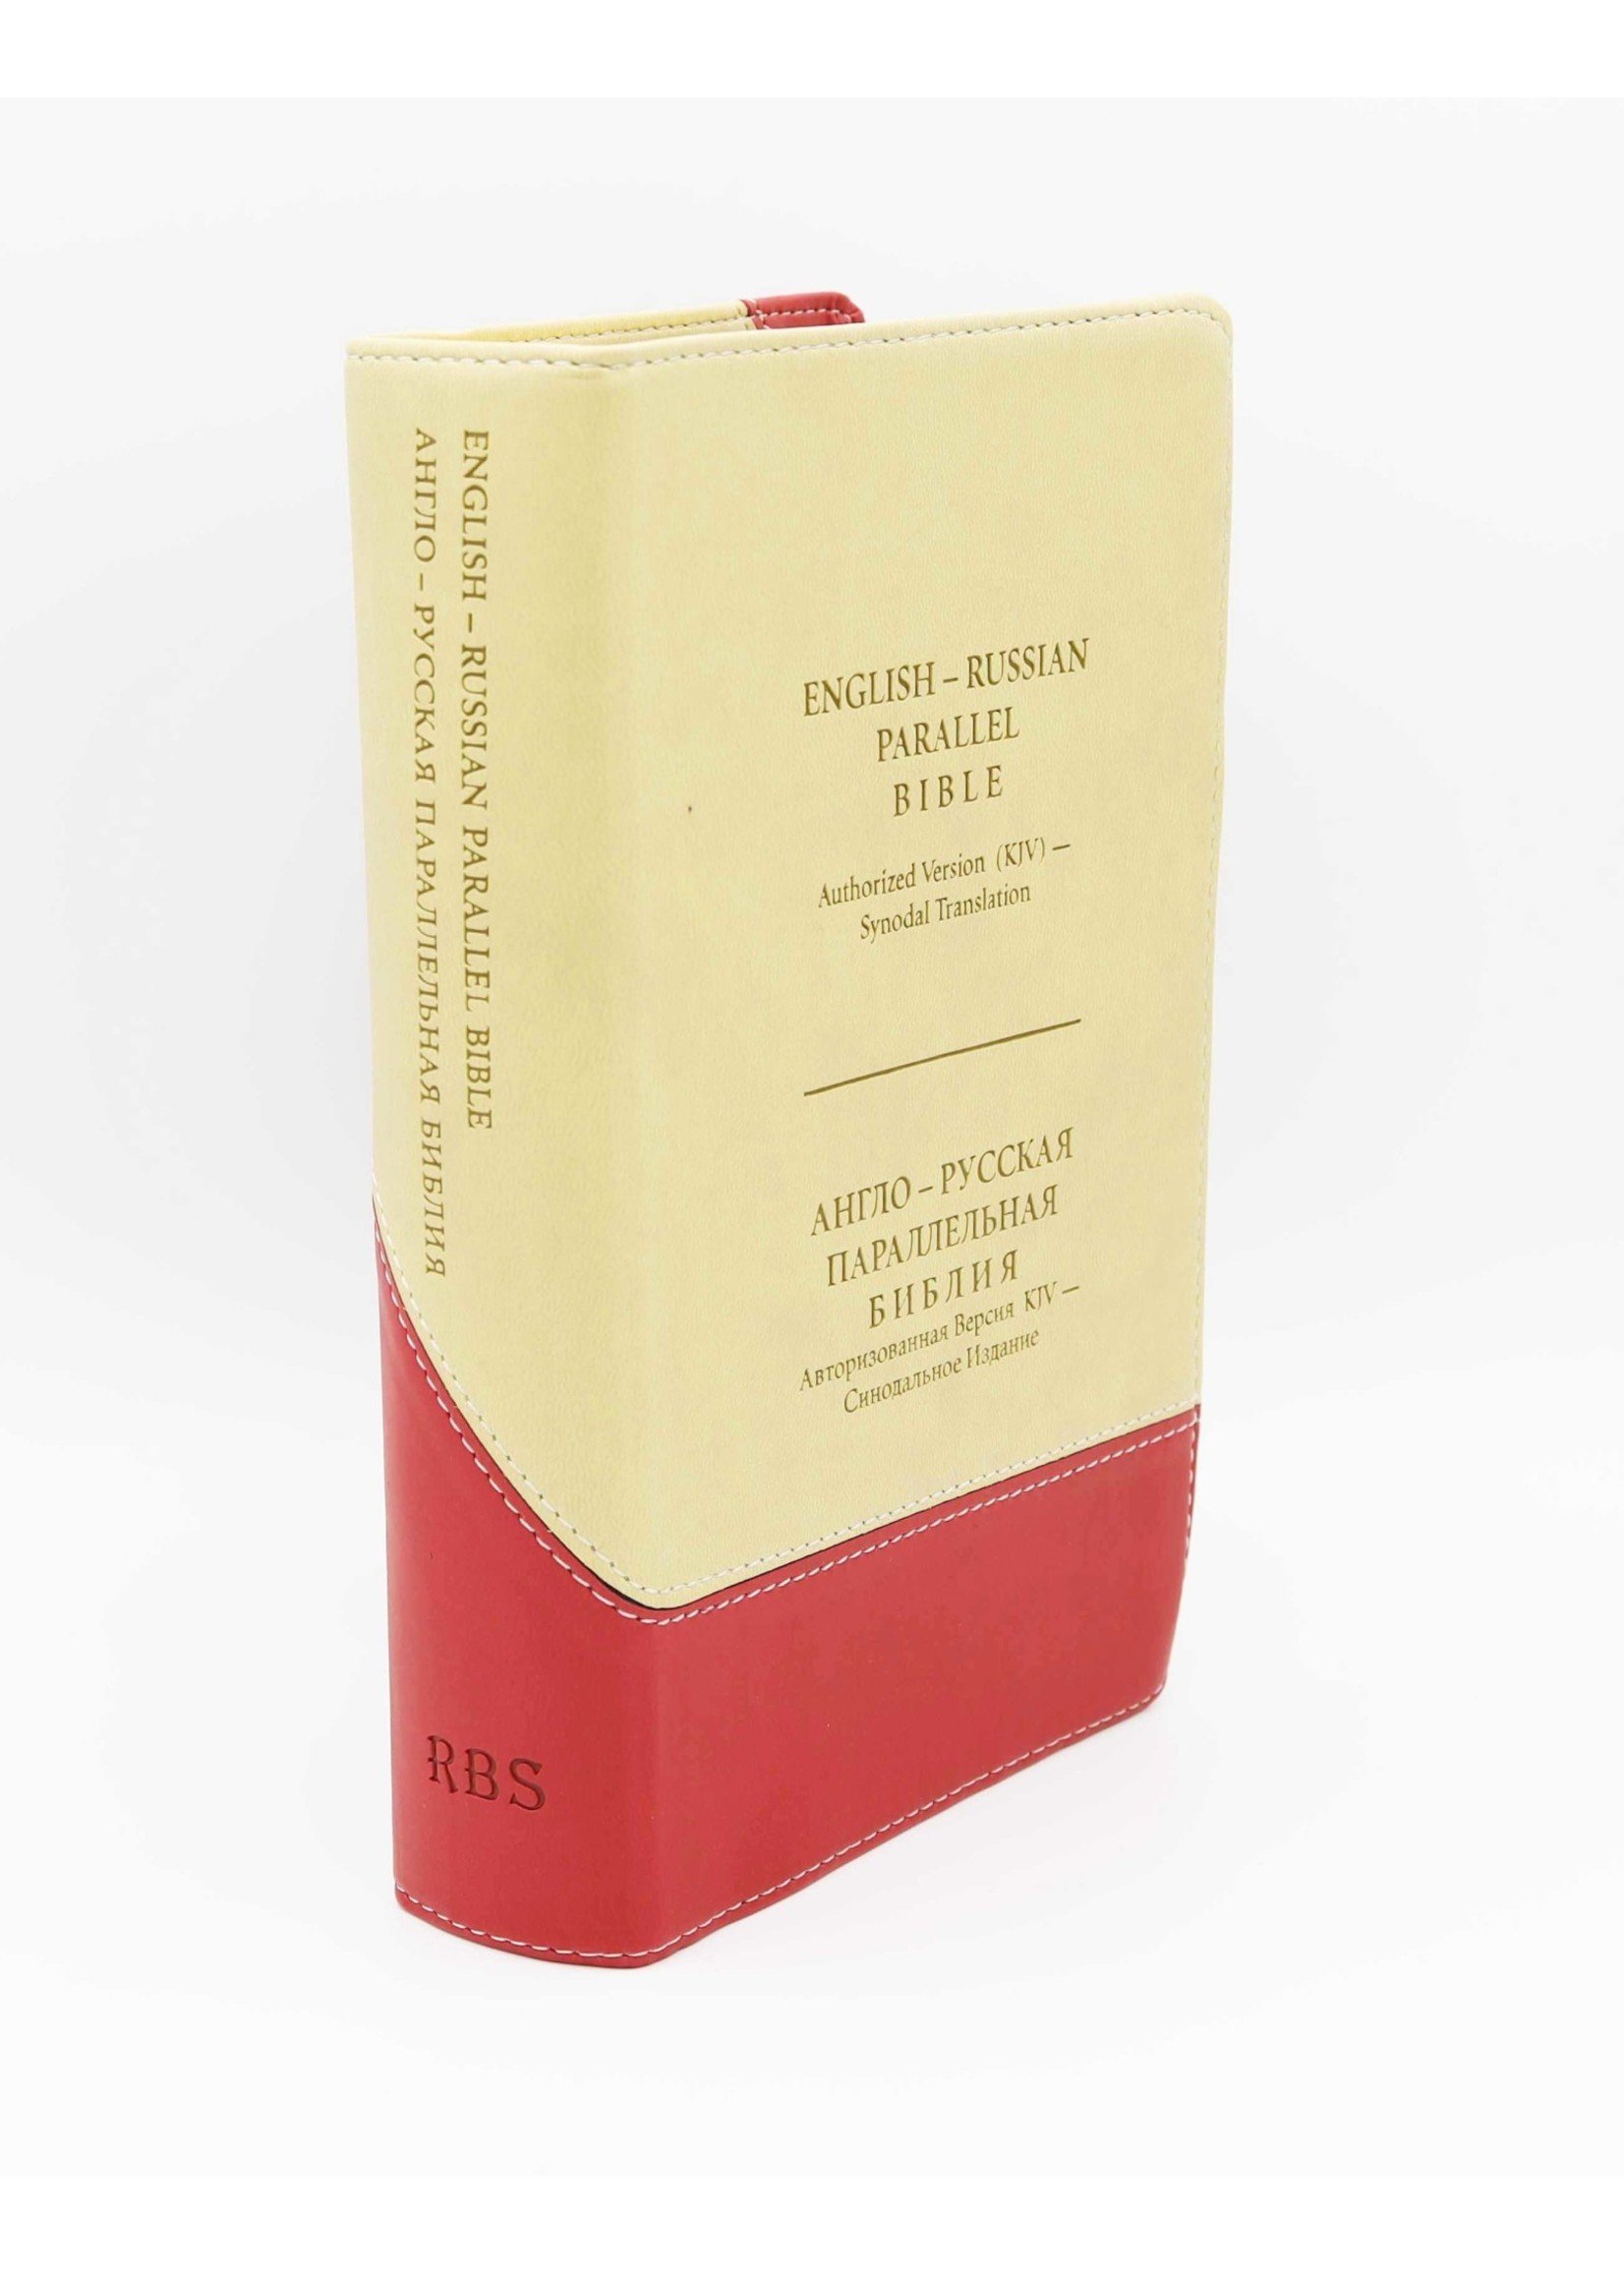 English-Russian Parallel Bible (KJV-SYNO), Index, Small,  Red/Tan No Zipper